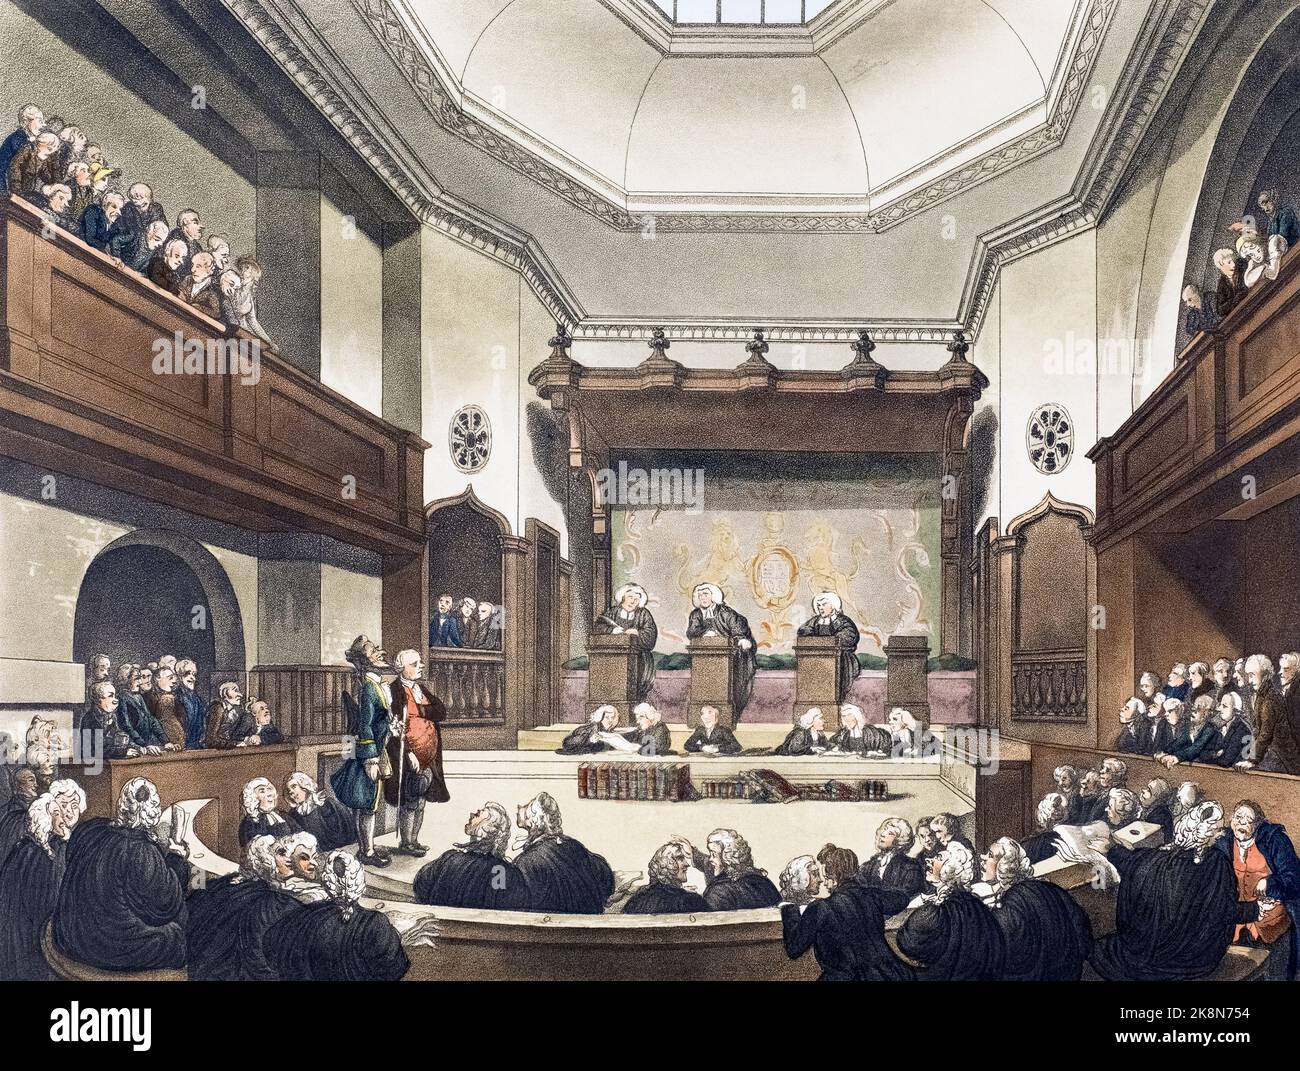 Court of Common Pleas, Westminster Hall.  Circa 1808.  After a work by August Pugin and Thomas Rowlandson in the Microcosm of London, published in three volumes between 1808 and 1810 by Rudolph Ackermann.   Pugin was the artist responsible for the architectural elements in the Microcosm pictures; Thomas Rowlandson was hired to add the lively human figures. Stock Photo